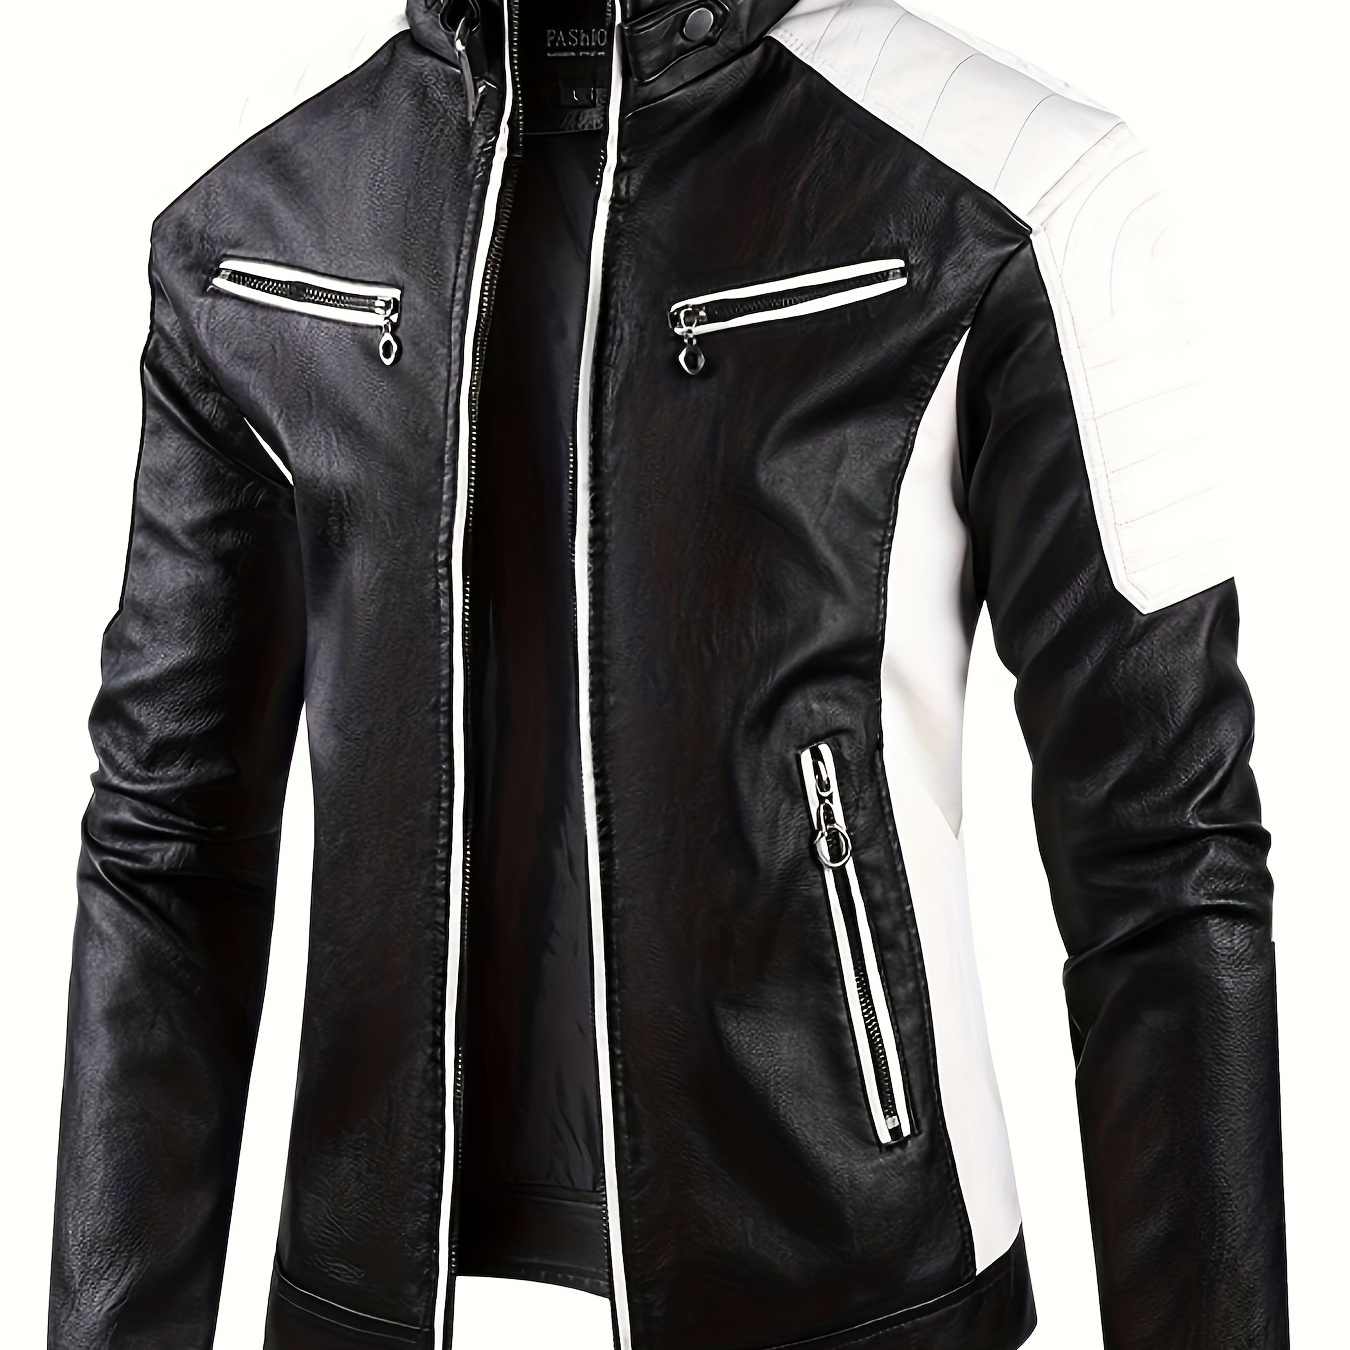 

Men's Pu Leather Color Block Jacket With Multi Zipper Pockets, Casual Stand Collar Slim-fit Zip Up Long Sleeve Jacket For Outdoor